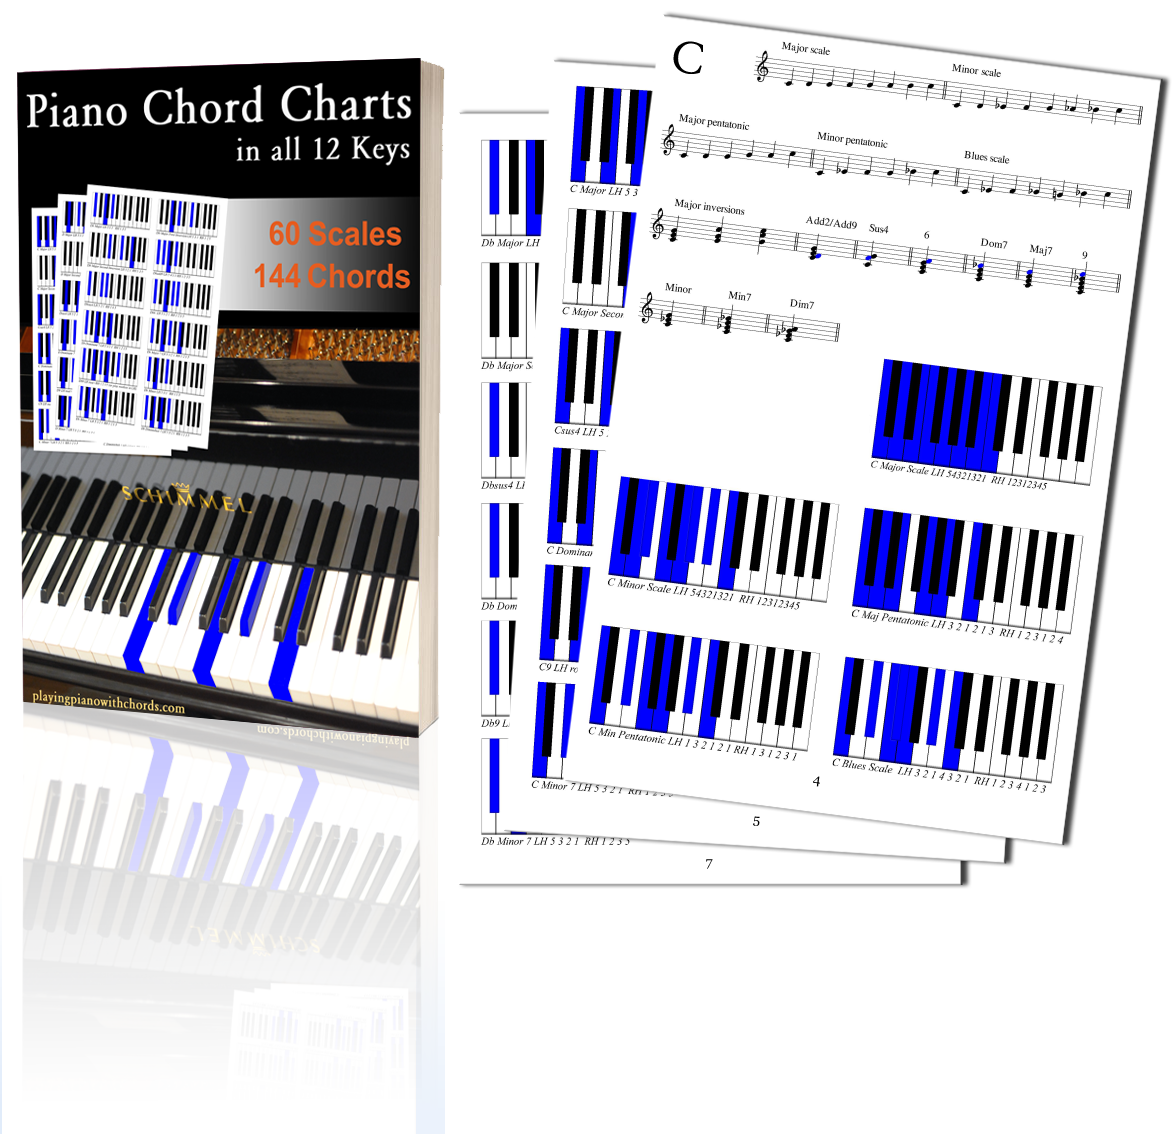 piano-chord-charts-200-chords-and-scales-get-your-chart-for-all-keys